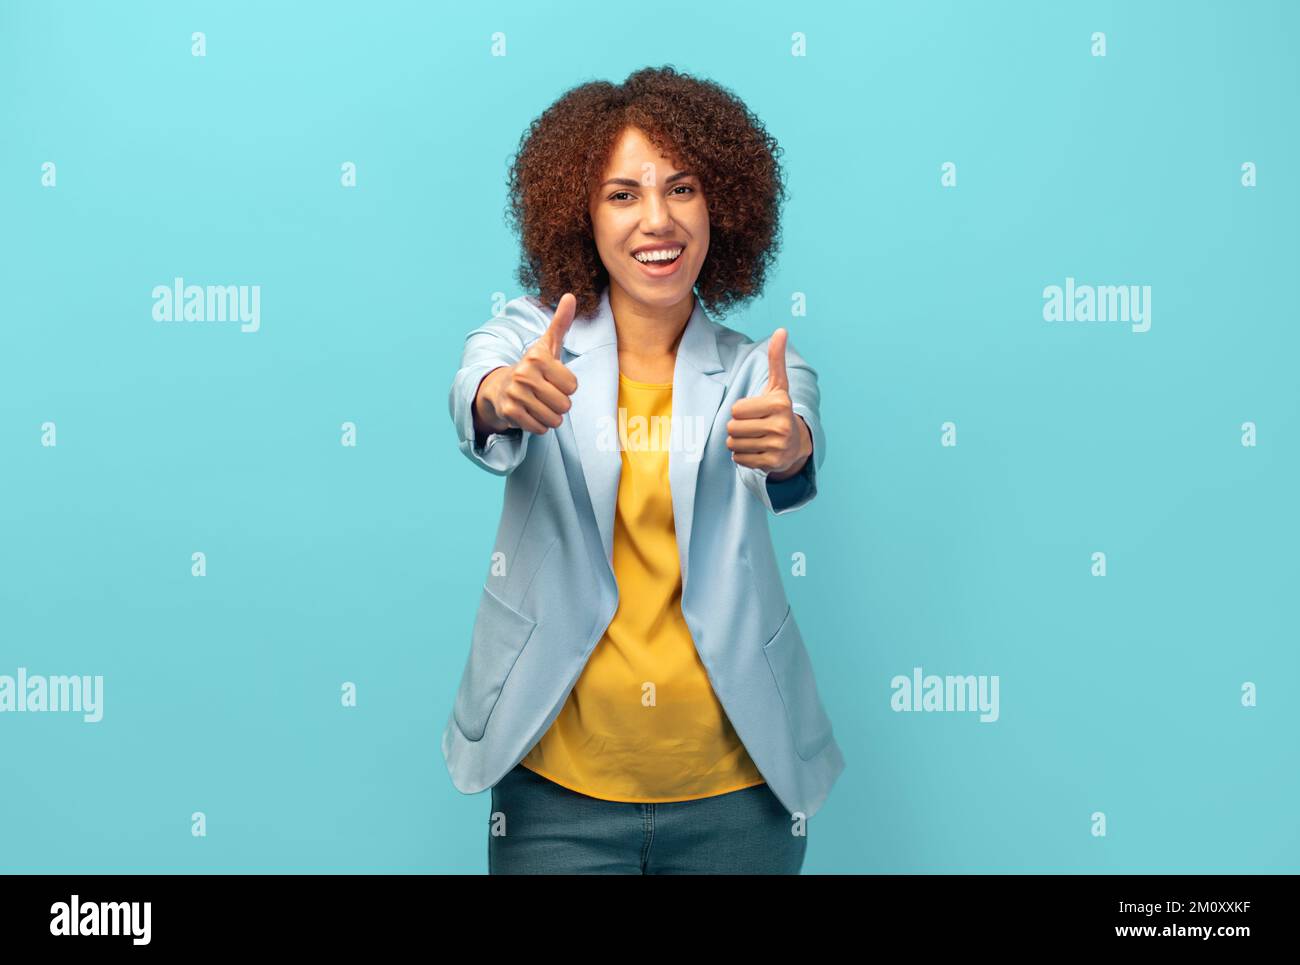 Happy African American woman with curly hair in jacket approving doing positive gesture with hand on blue background Stock Photo